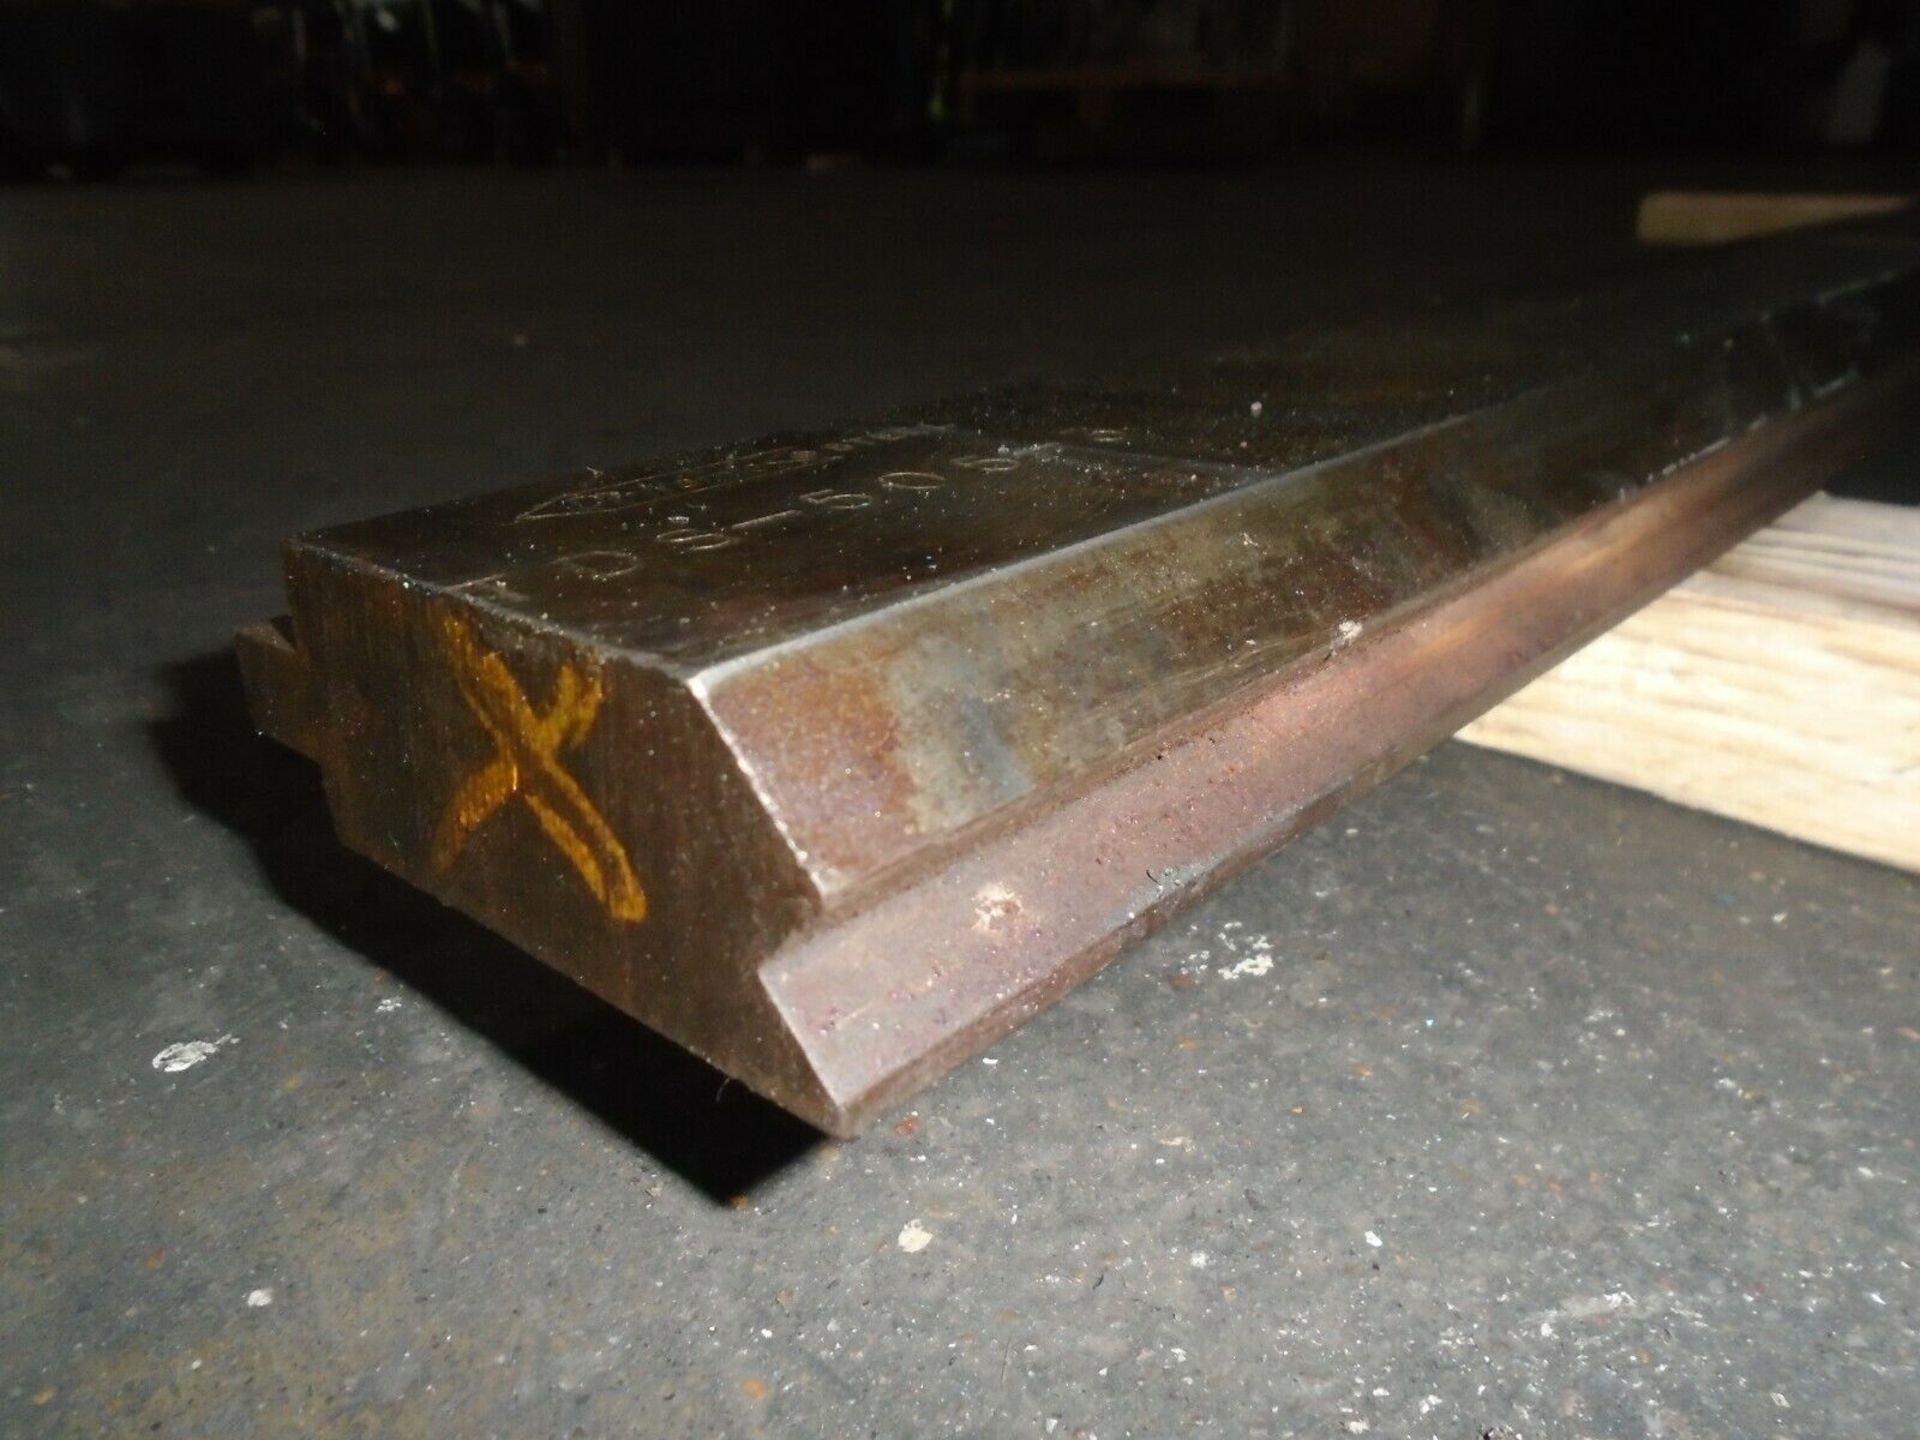 Press Brake Offset Forming Die 1 Die Only See Pictures For Dimensions - Image 3 of 4